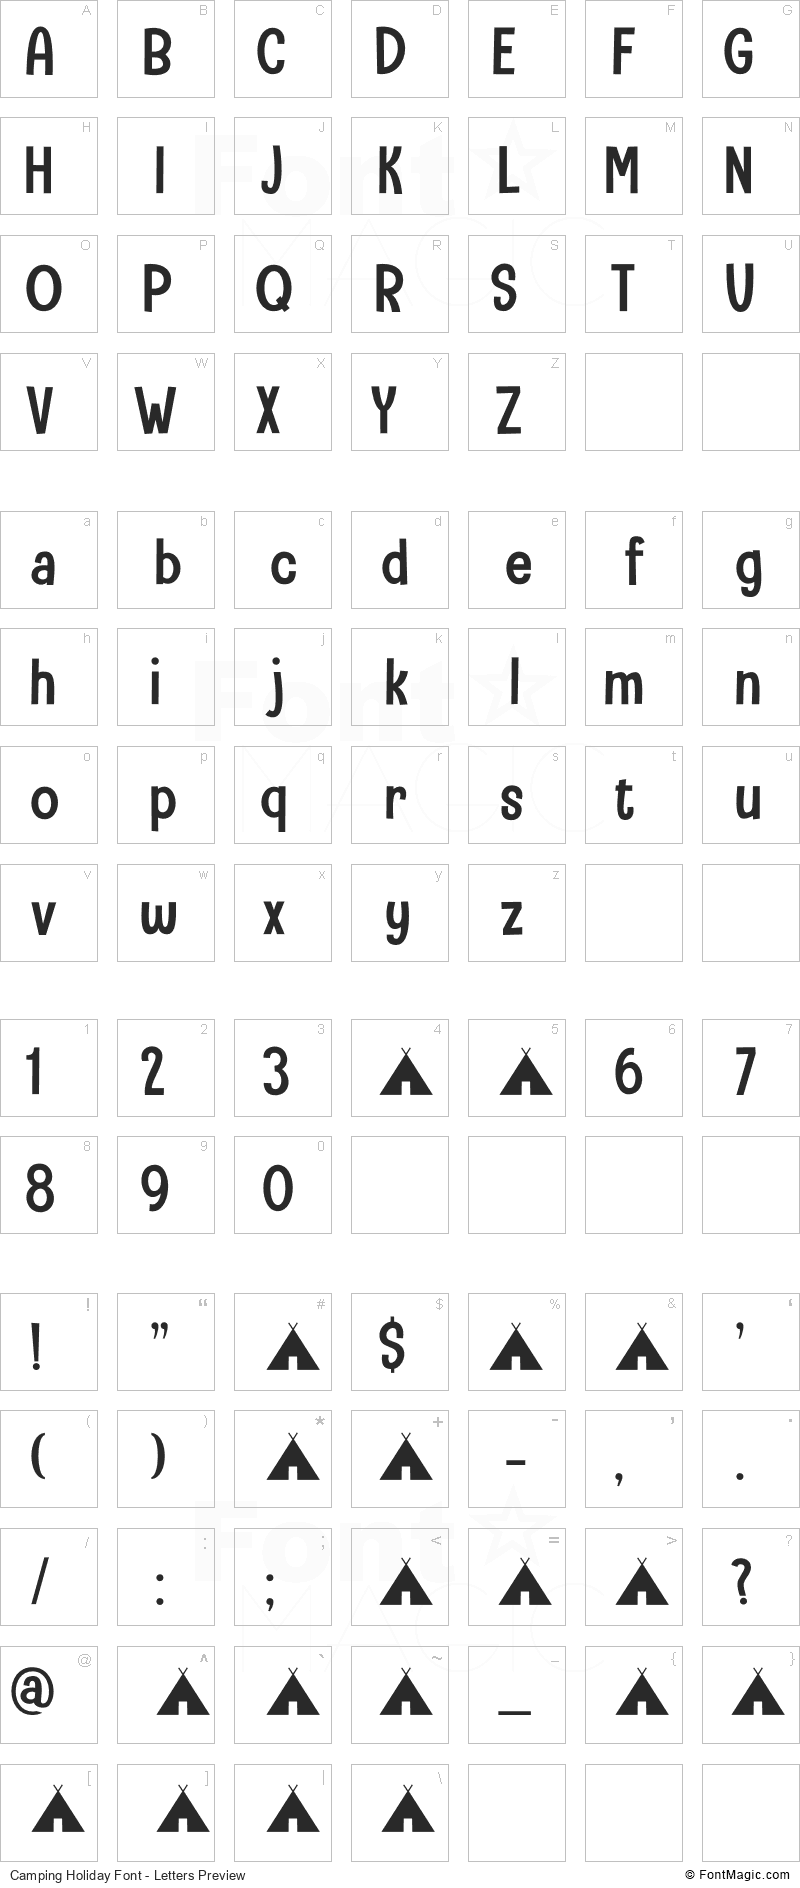 Camping Holiday Font - All Latters Preview Chart